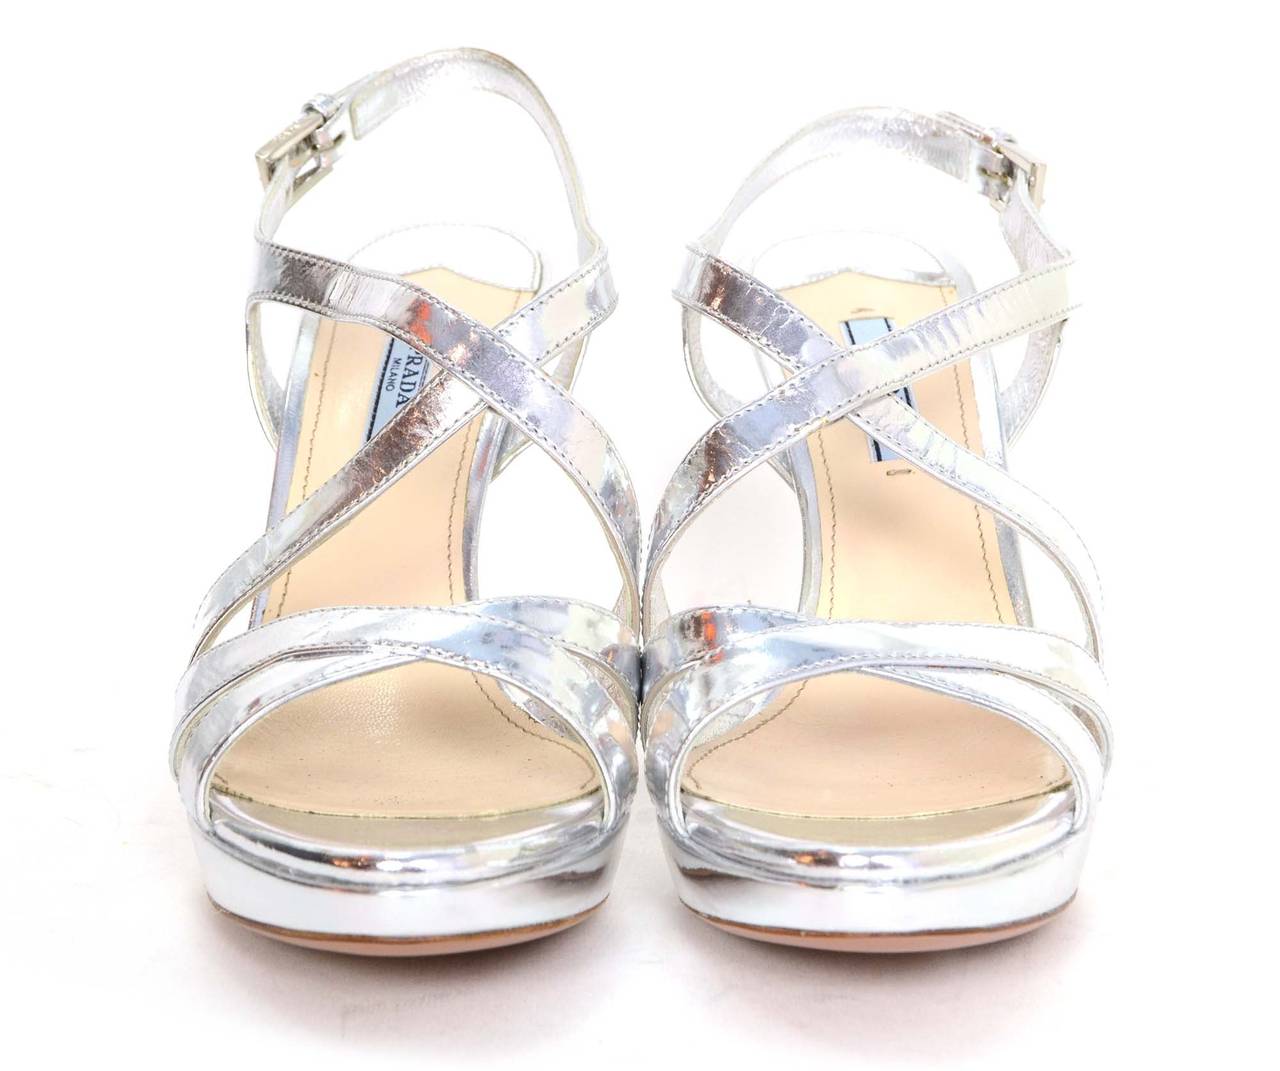 Prada Silver Glazed Leather Strappy Sandals 
Made in: Italy
Color: Silver
Composition: Glazed leather
Sole Stamp: Made in Italy 39 1/2 Prada
Closure/opening: Ankle buckle
Current Retail: $750 + tax
Overall Condition: Excellent with the